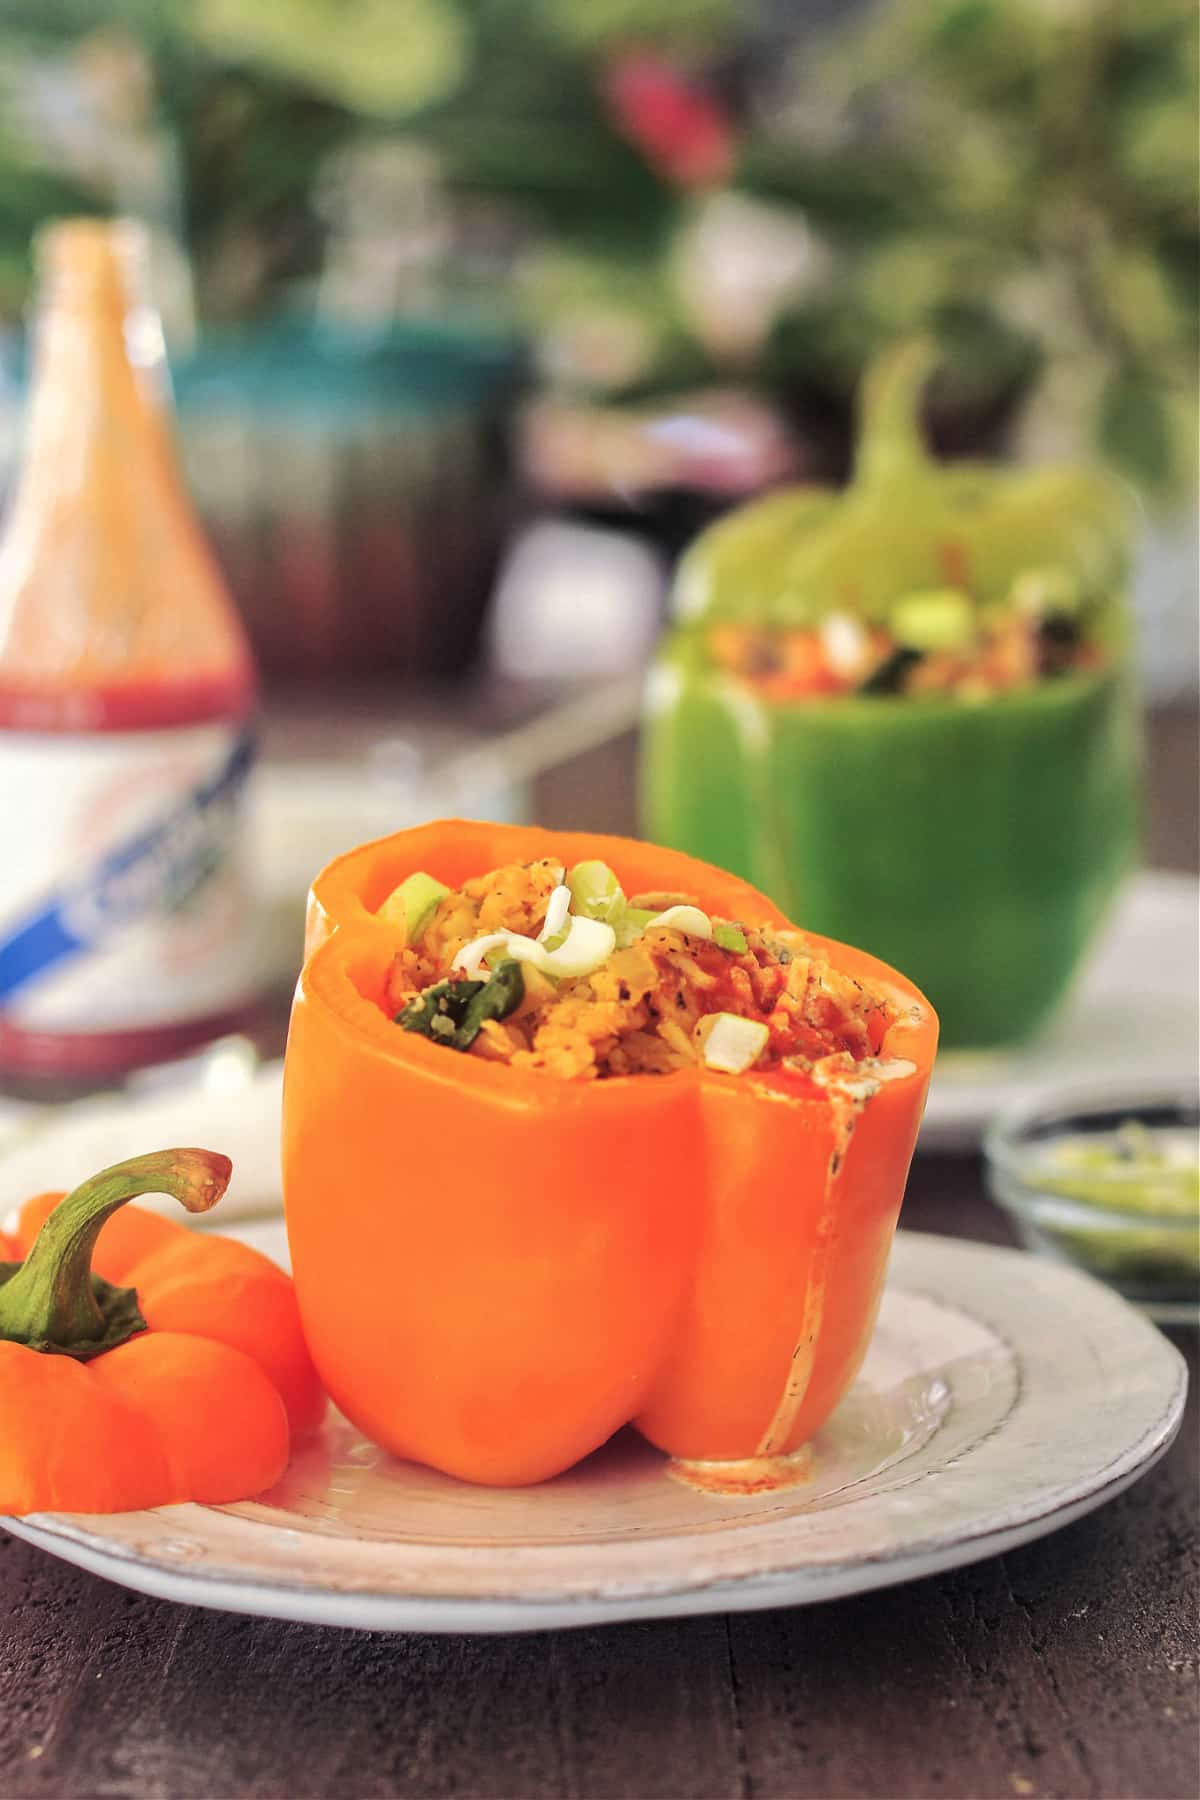 An orange bell pepper filled with vegan buffalo chicken and rice mixture. A green stuffed bell pepper is blurred in background, along with a bottle of hot sauce.